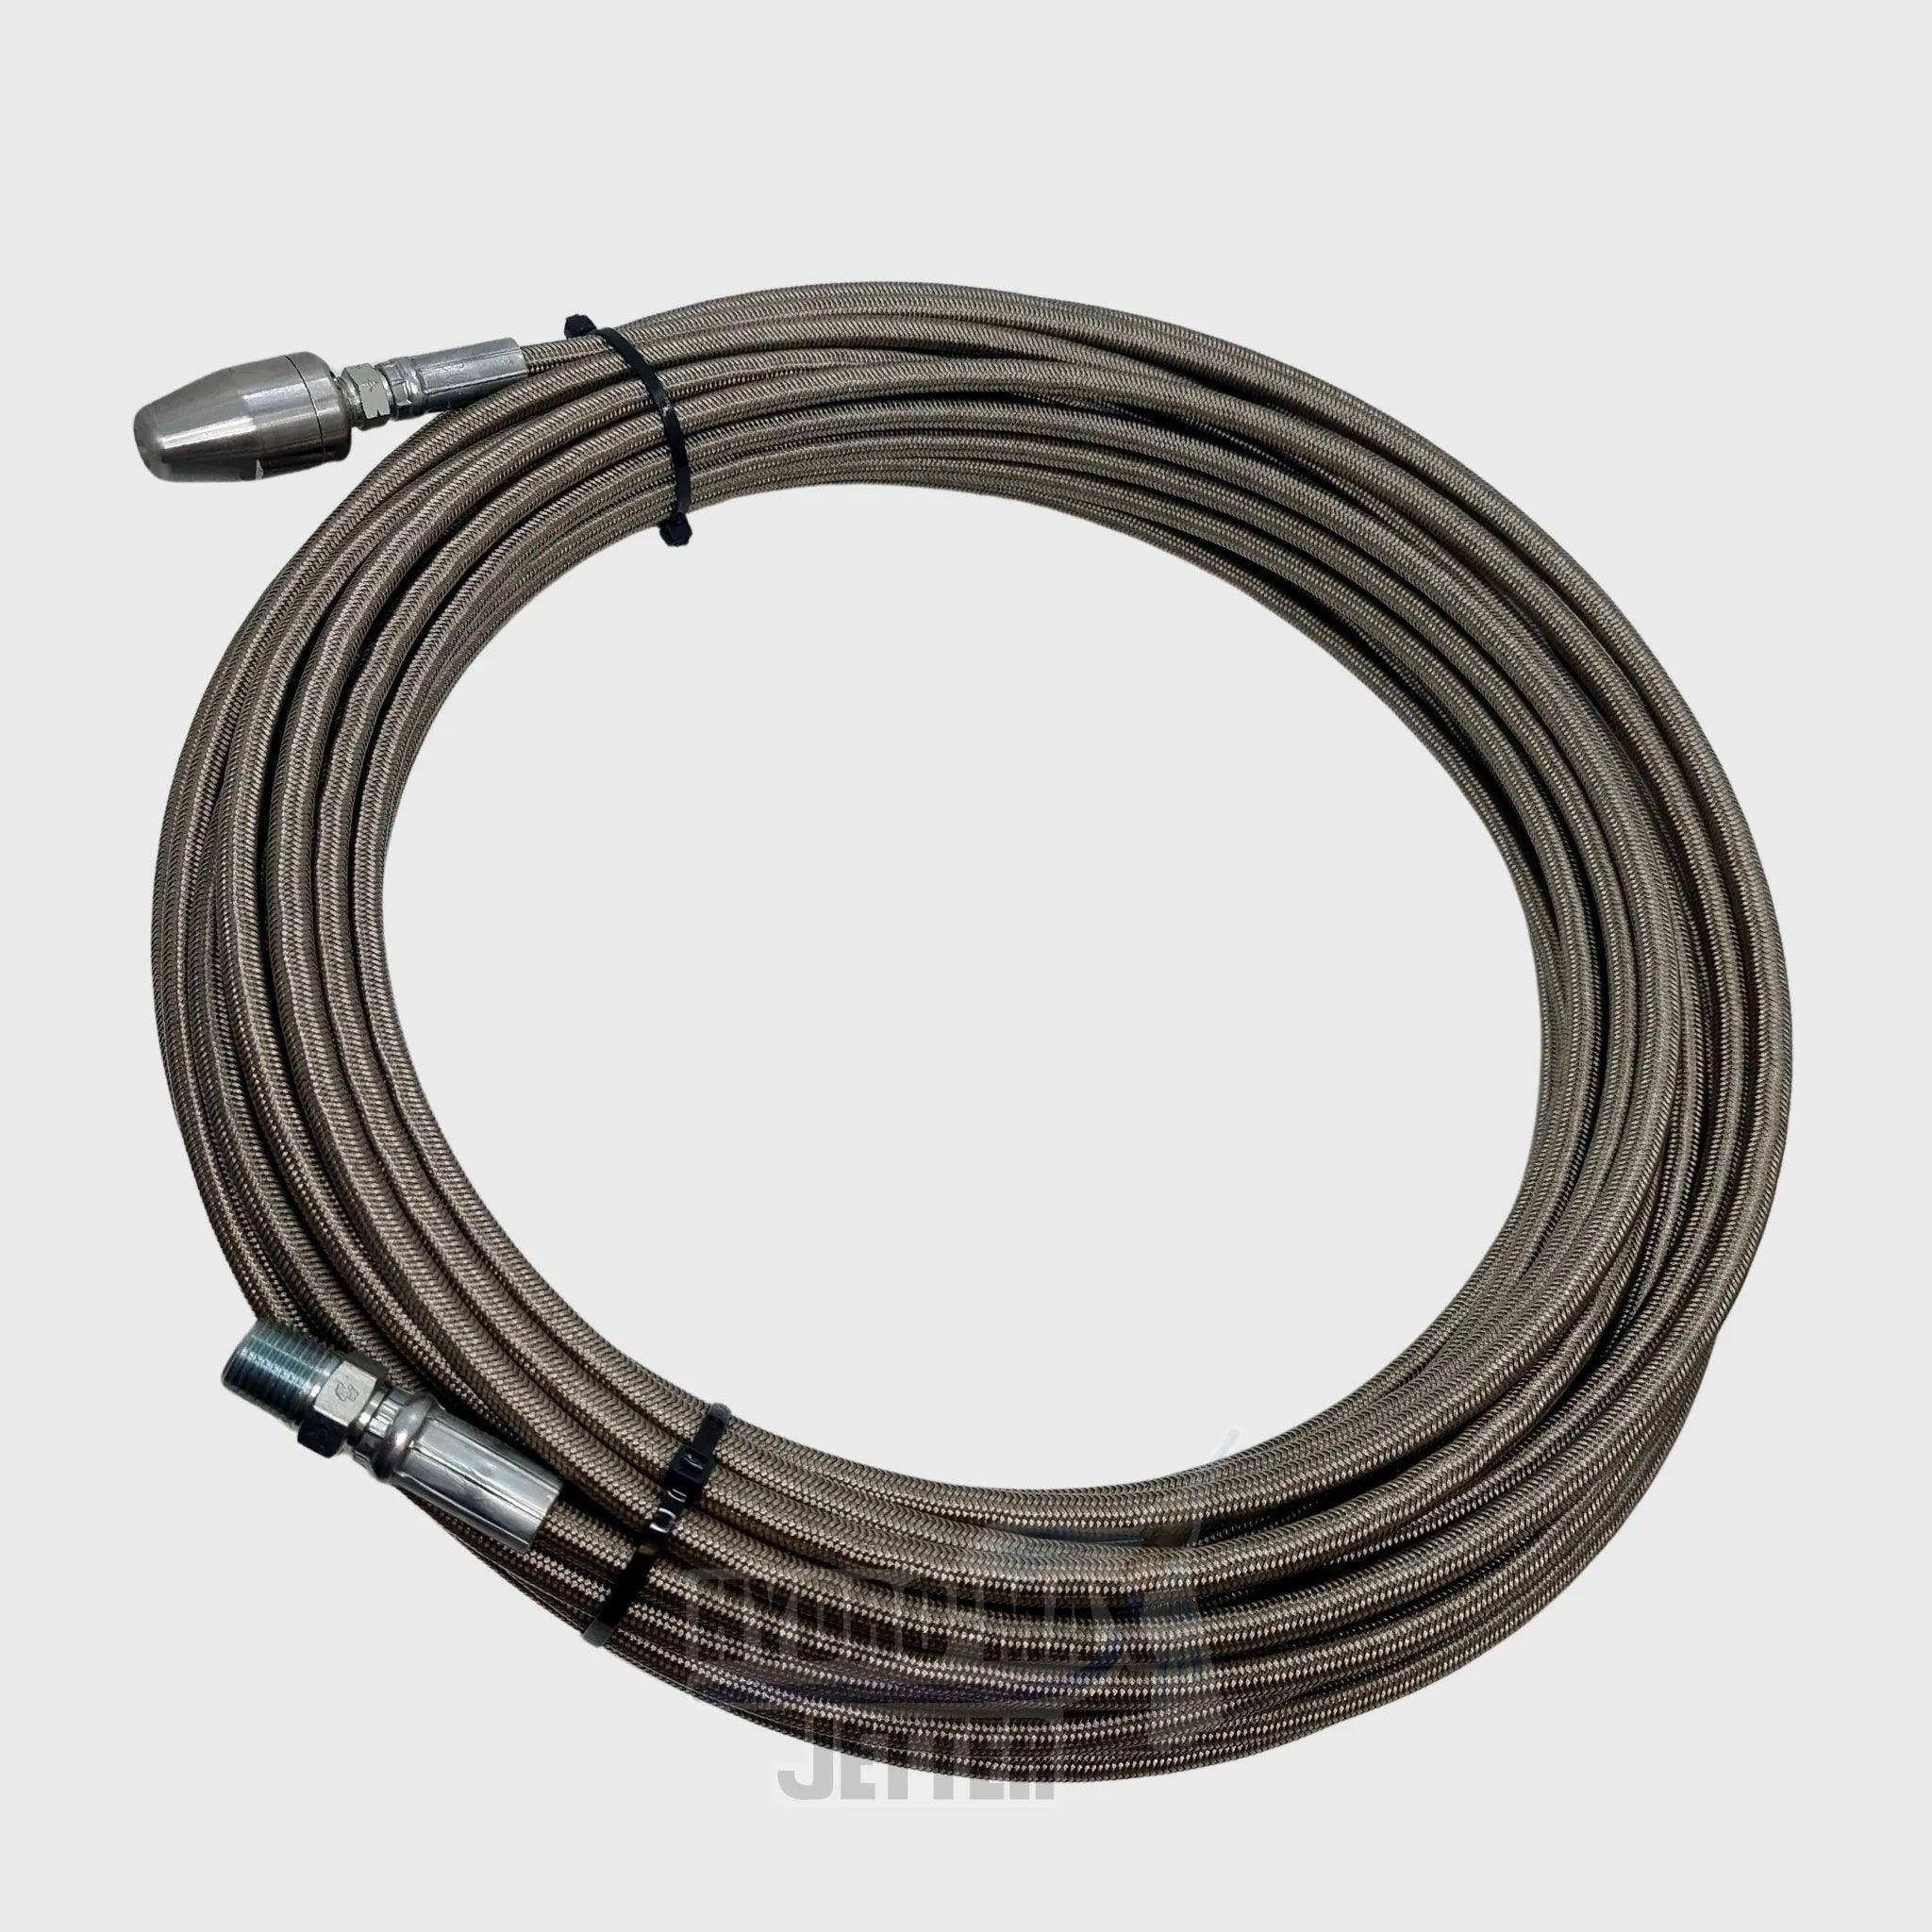 Stainless Steel Trap Hose 3/16”(I.D.) - Hydro-Max Jetter